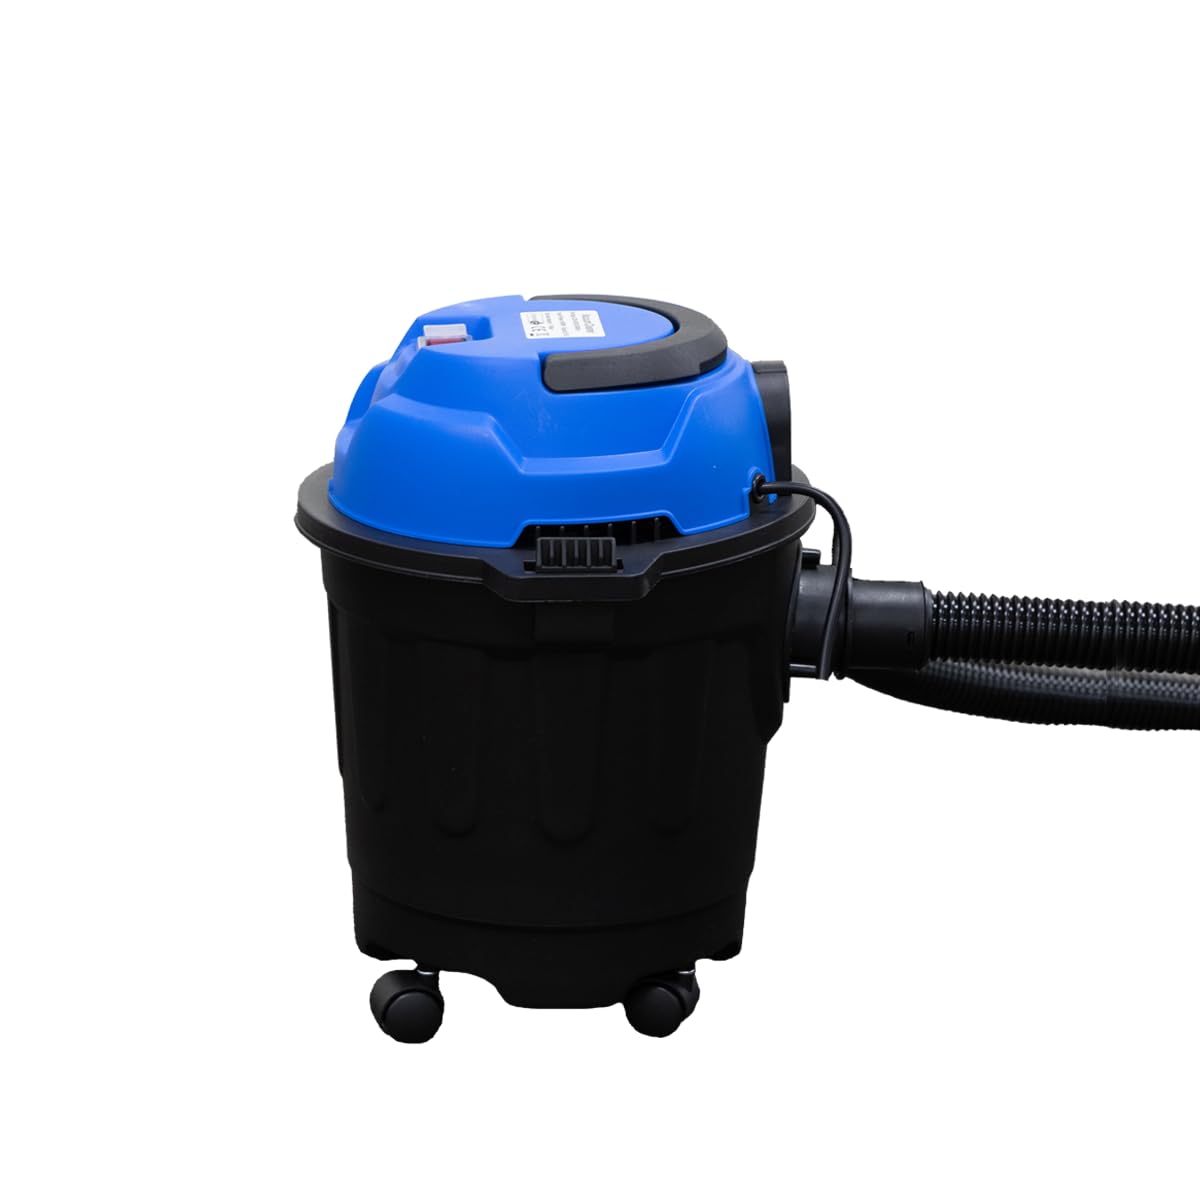 SPEAR 1000W Wet and Dry Vacuum Cleaner with 15L Capacity - Powerfull Suction, Low Noise & Efficient Cleaning for Home and Office